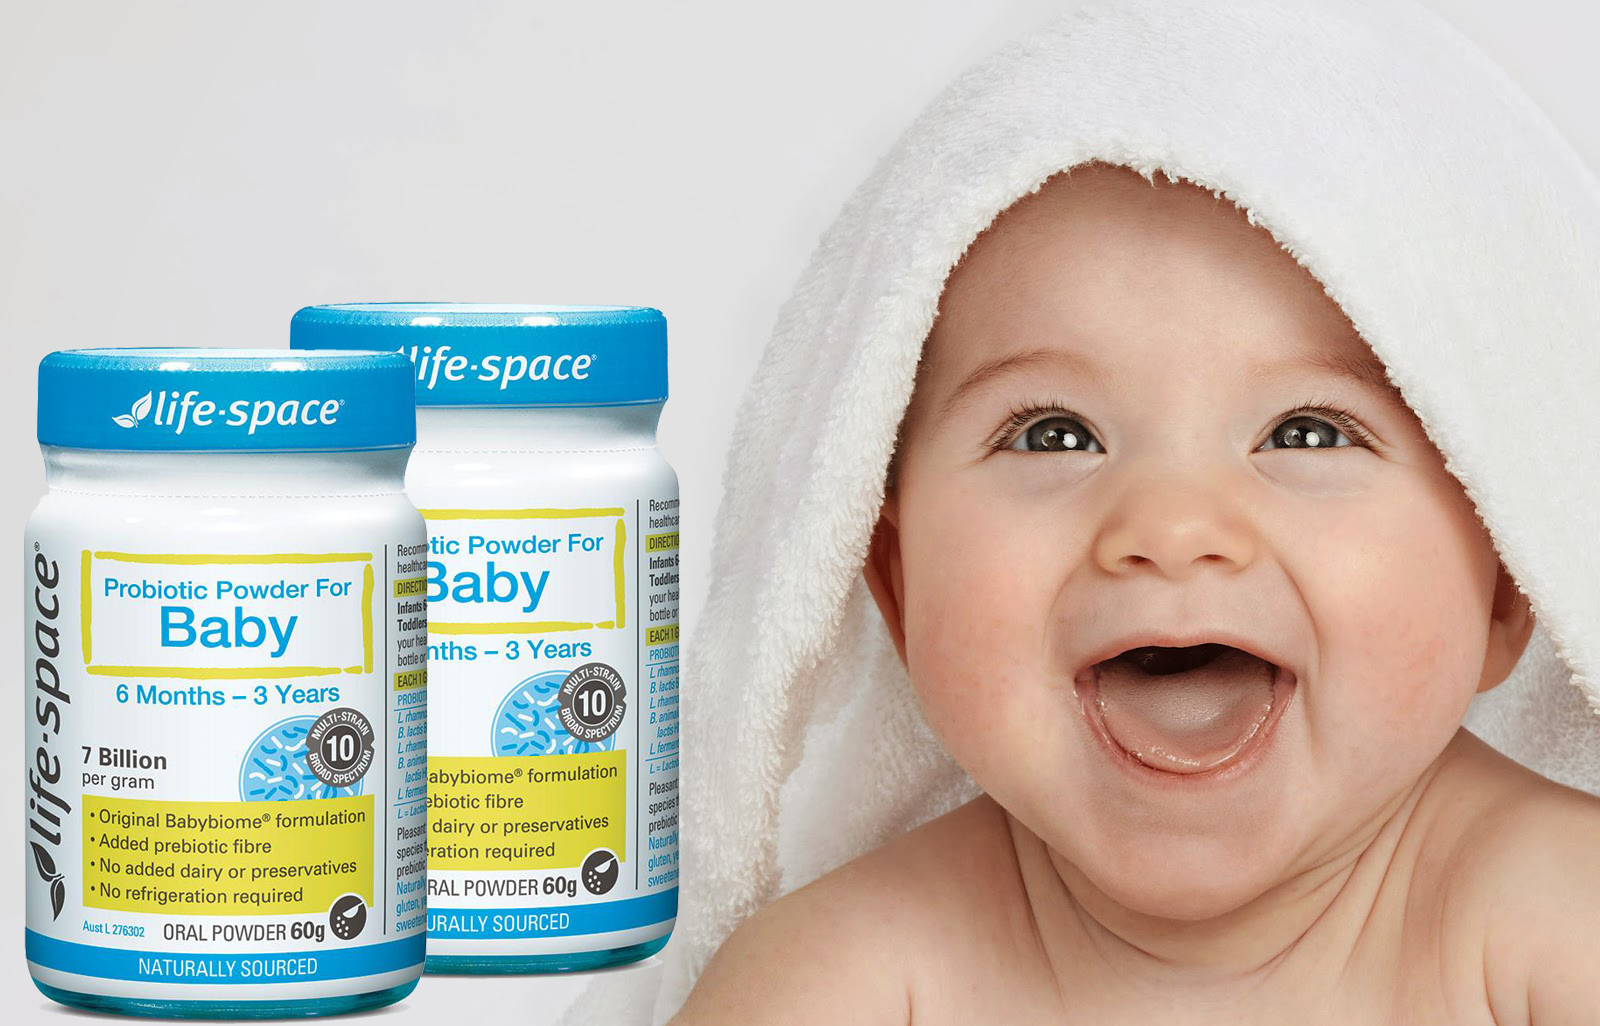 Probiotic Power for Baby